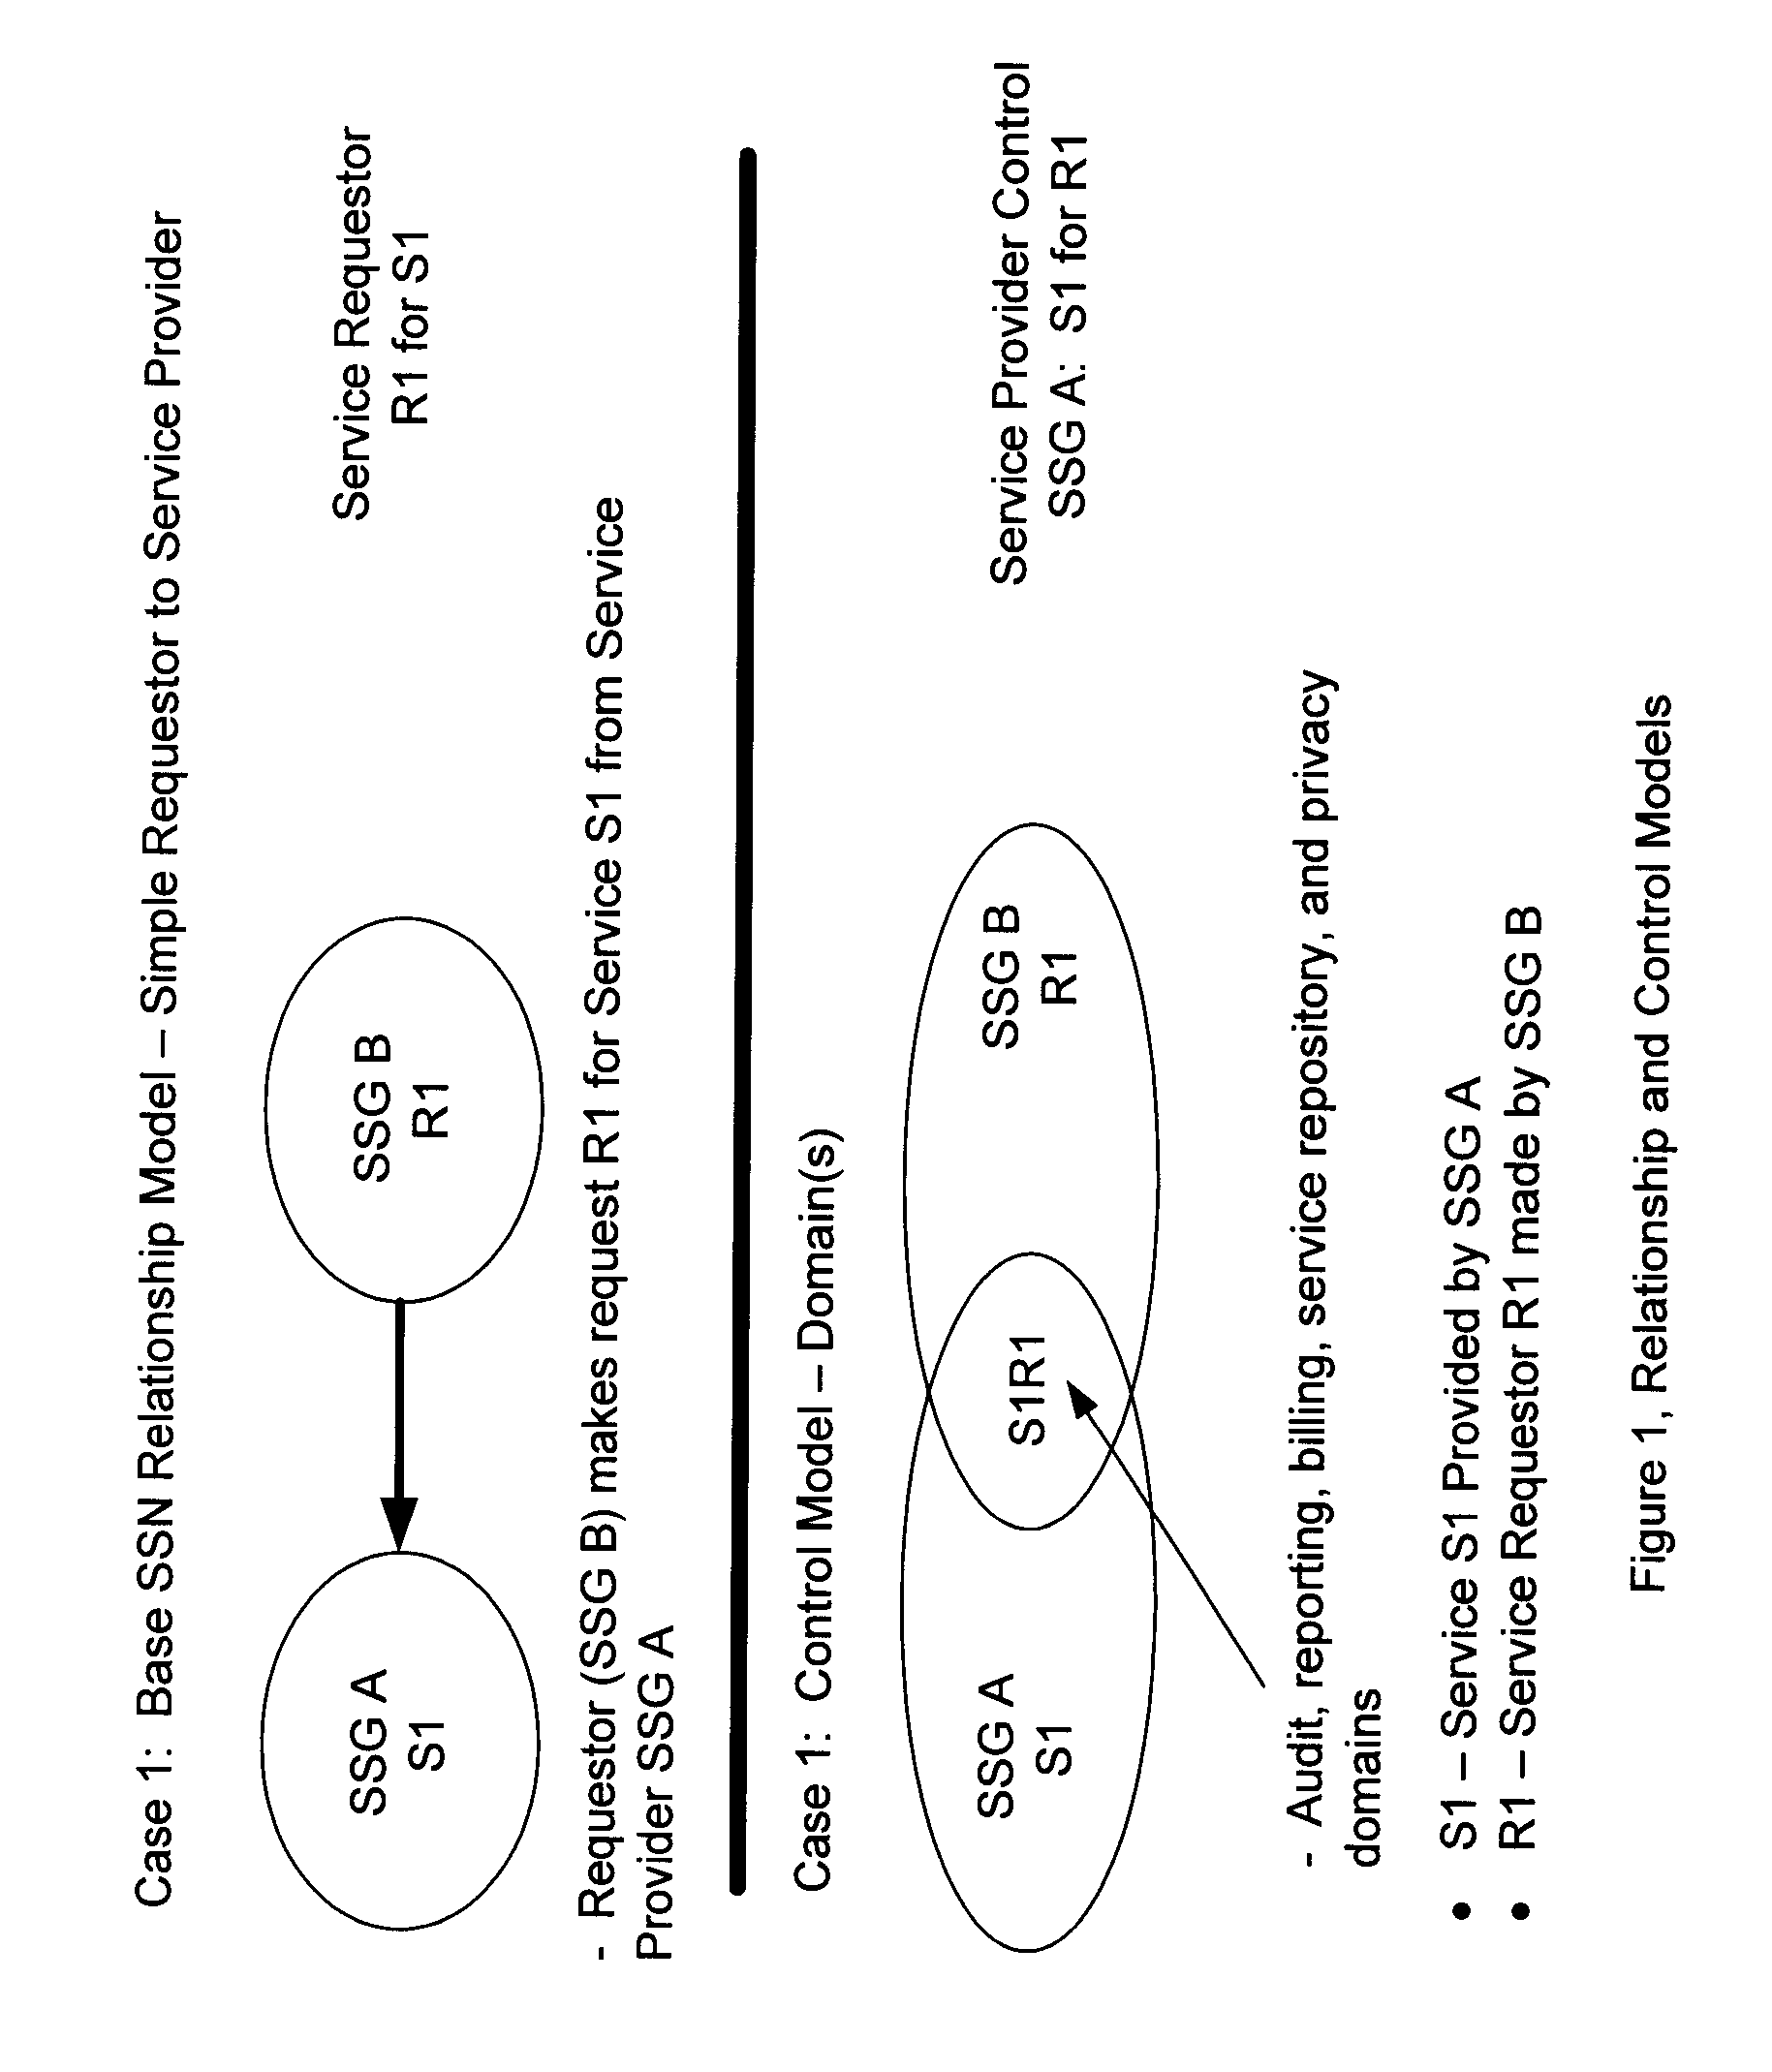 Method for creating virtual service connections to provide a secure network